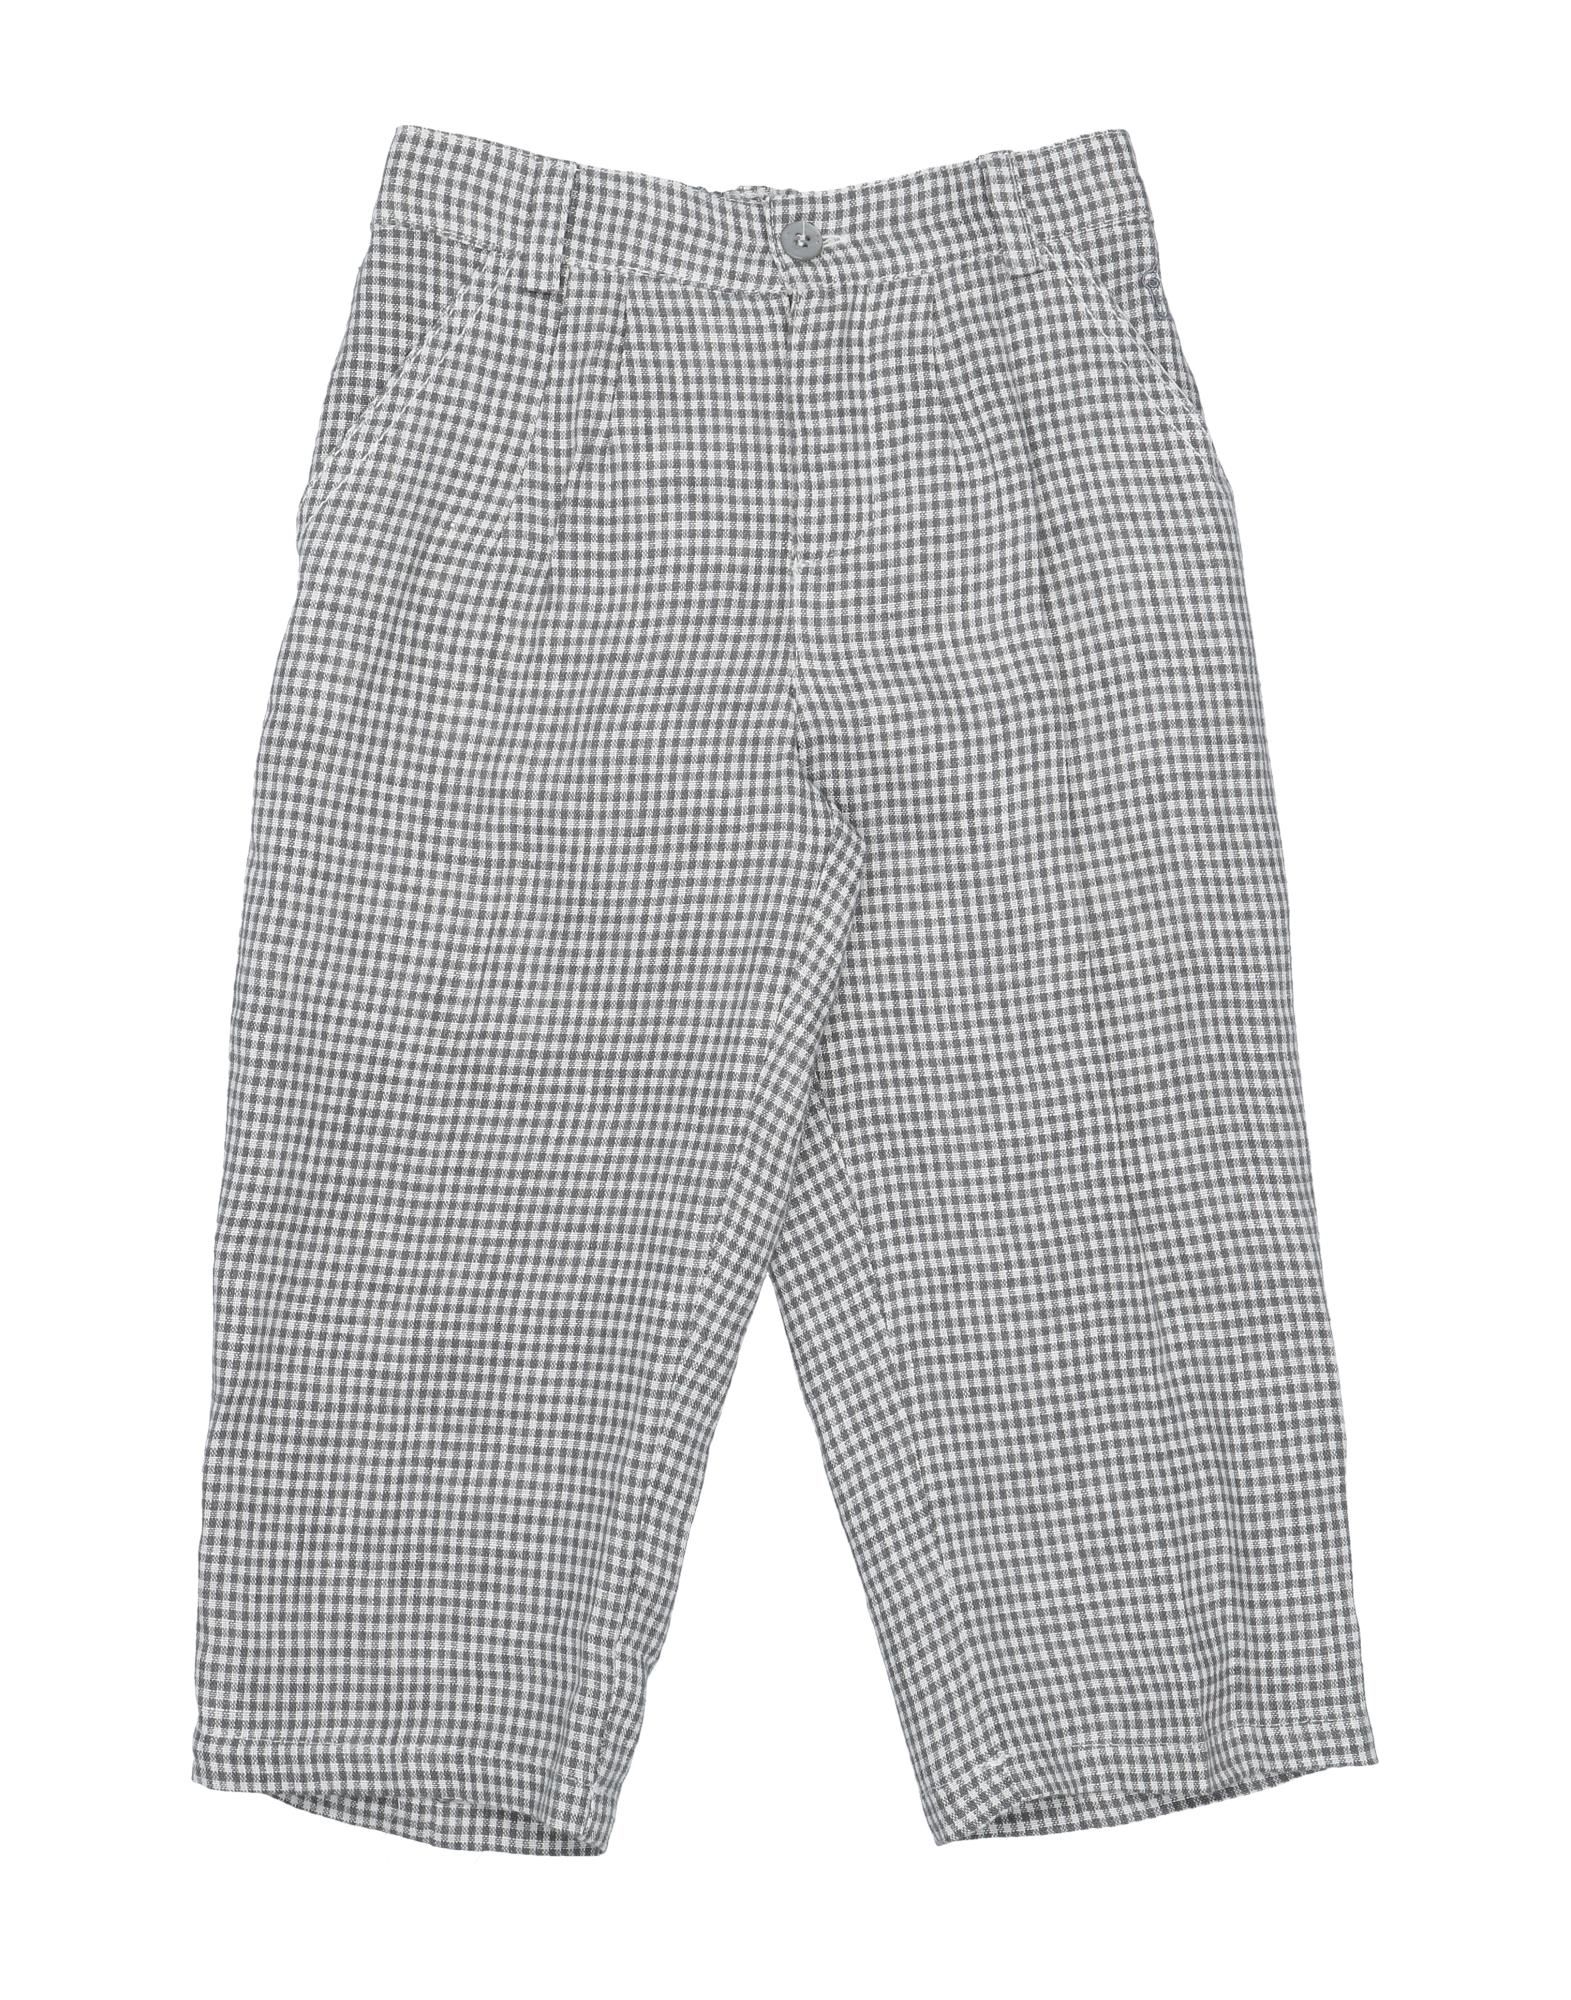 Muffin & Co. Kids' Pants In Grey